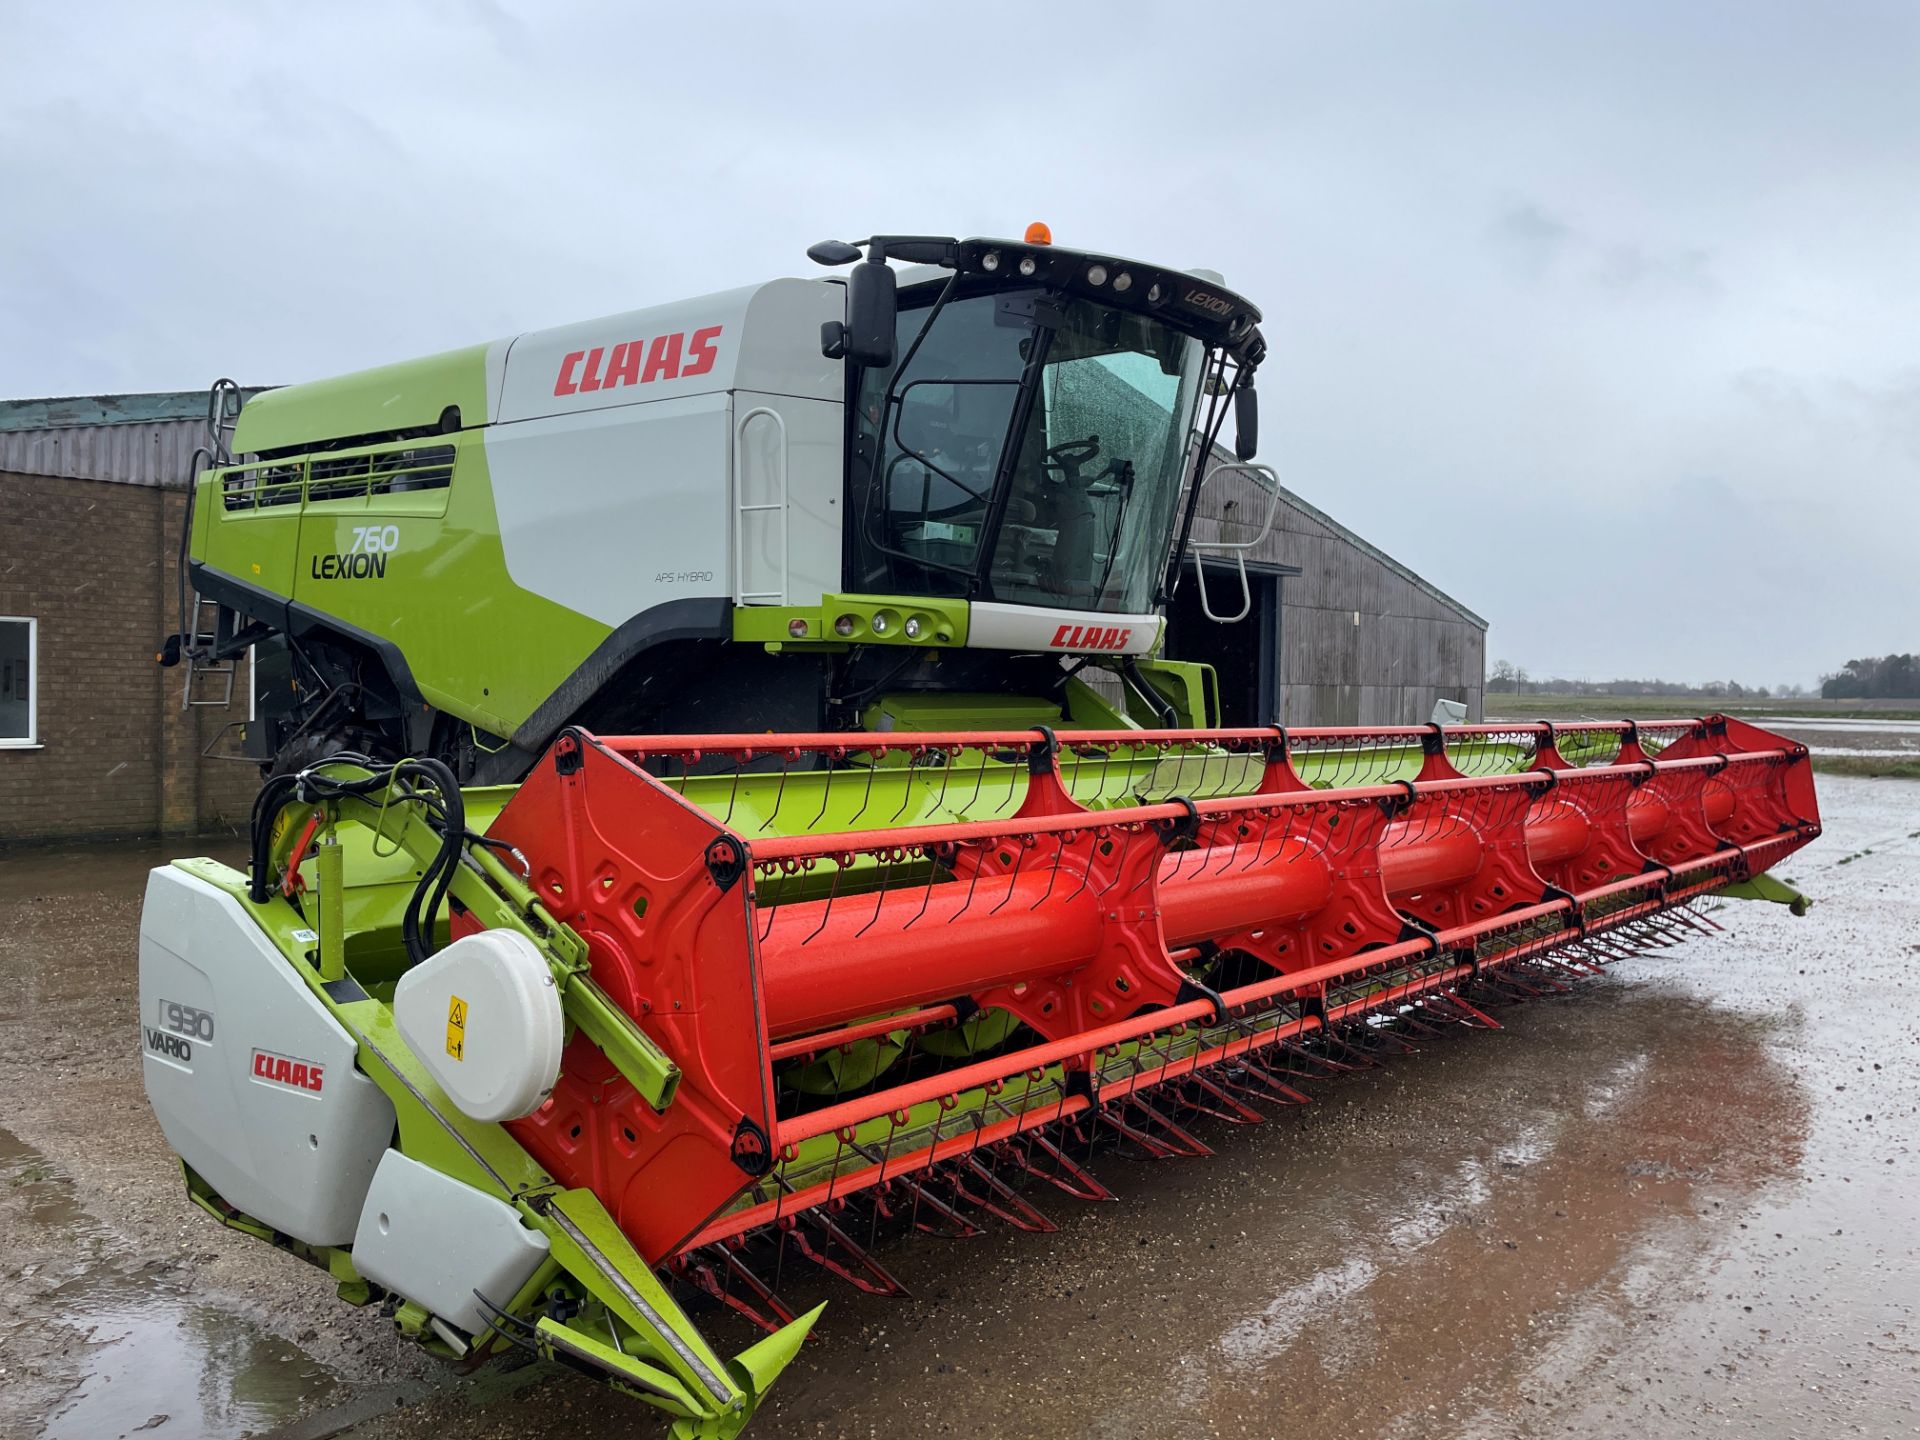 (15) Claas Lexion 760TT Terra Trac combine harvester 930 9.3m Vario cutterbar with trolley, APS - Image 3 of 5